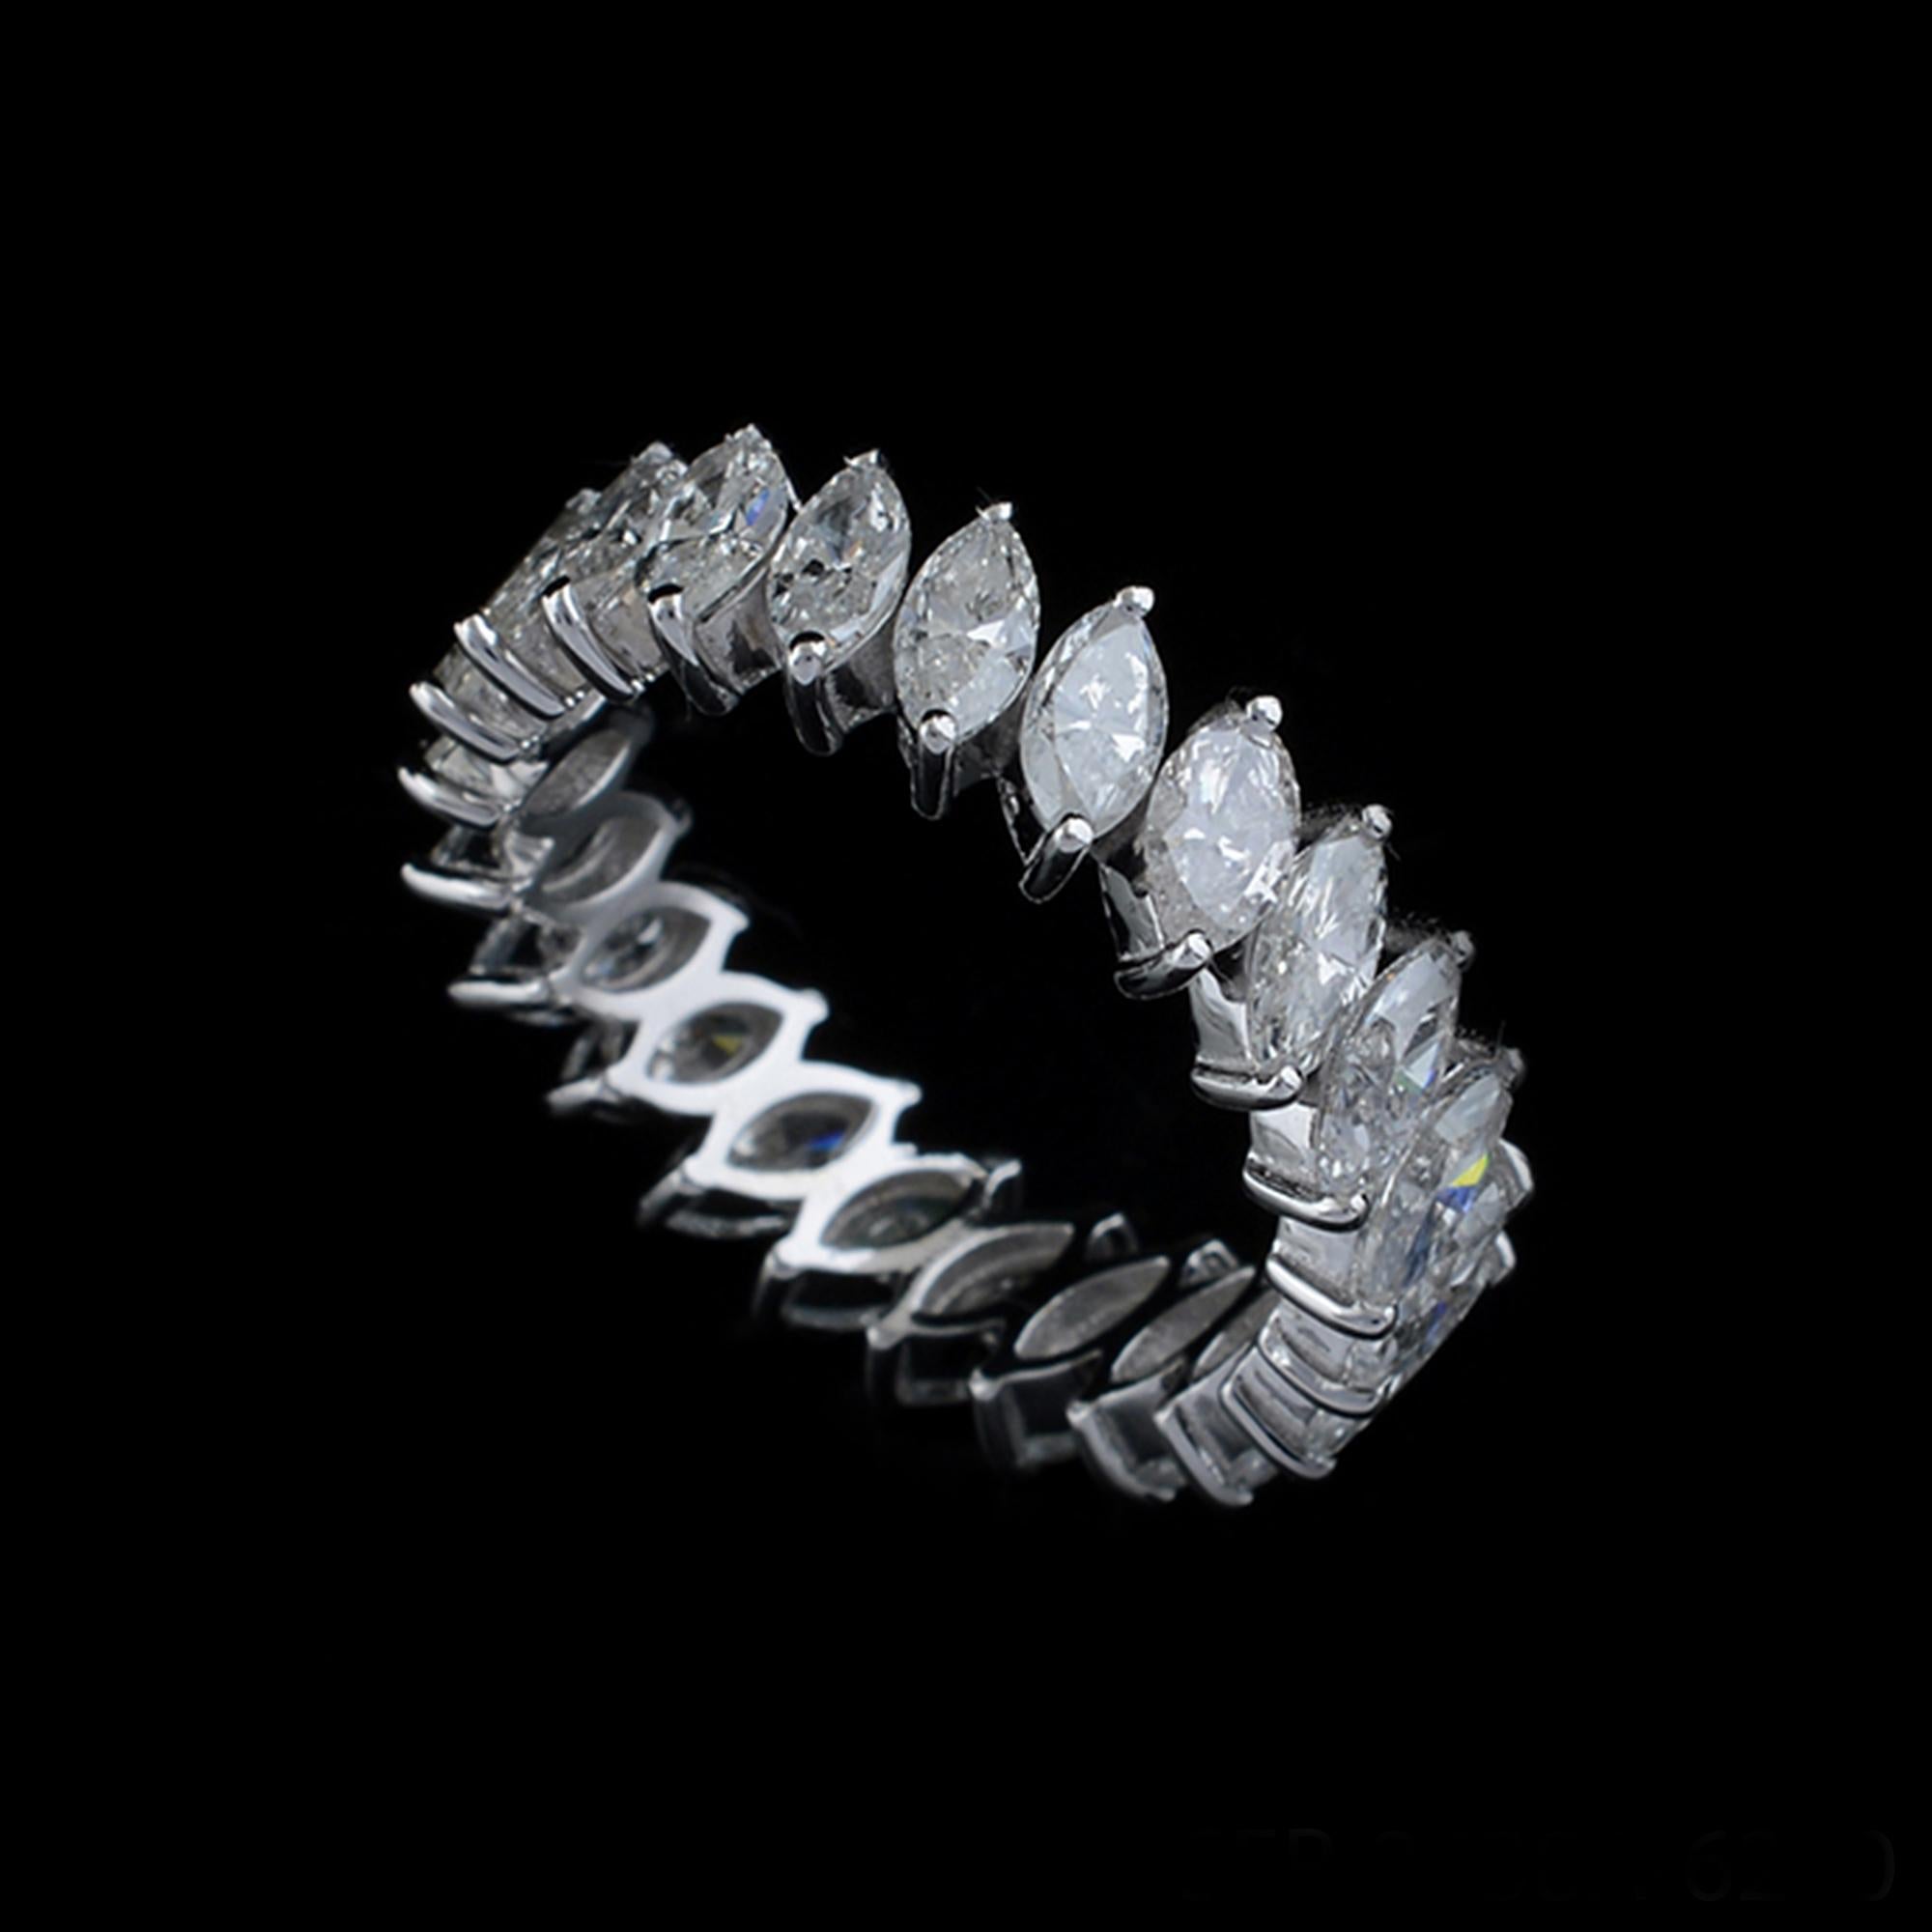 For Sale:  3.30 Carat SI Clarity HI Color Marquise Diamond Band Ring 18k White Gold Jewelry 5